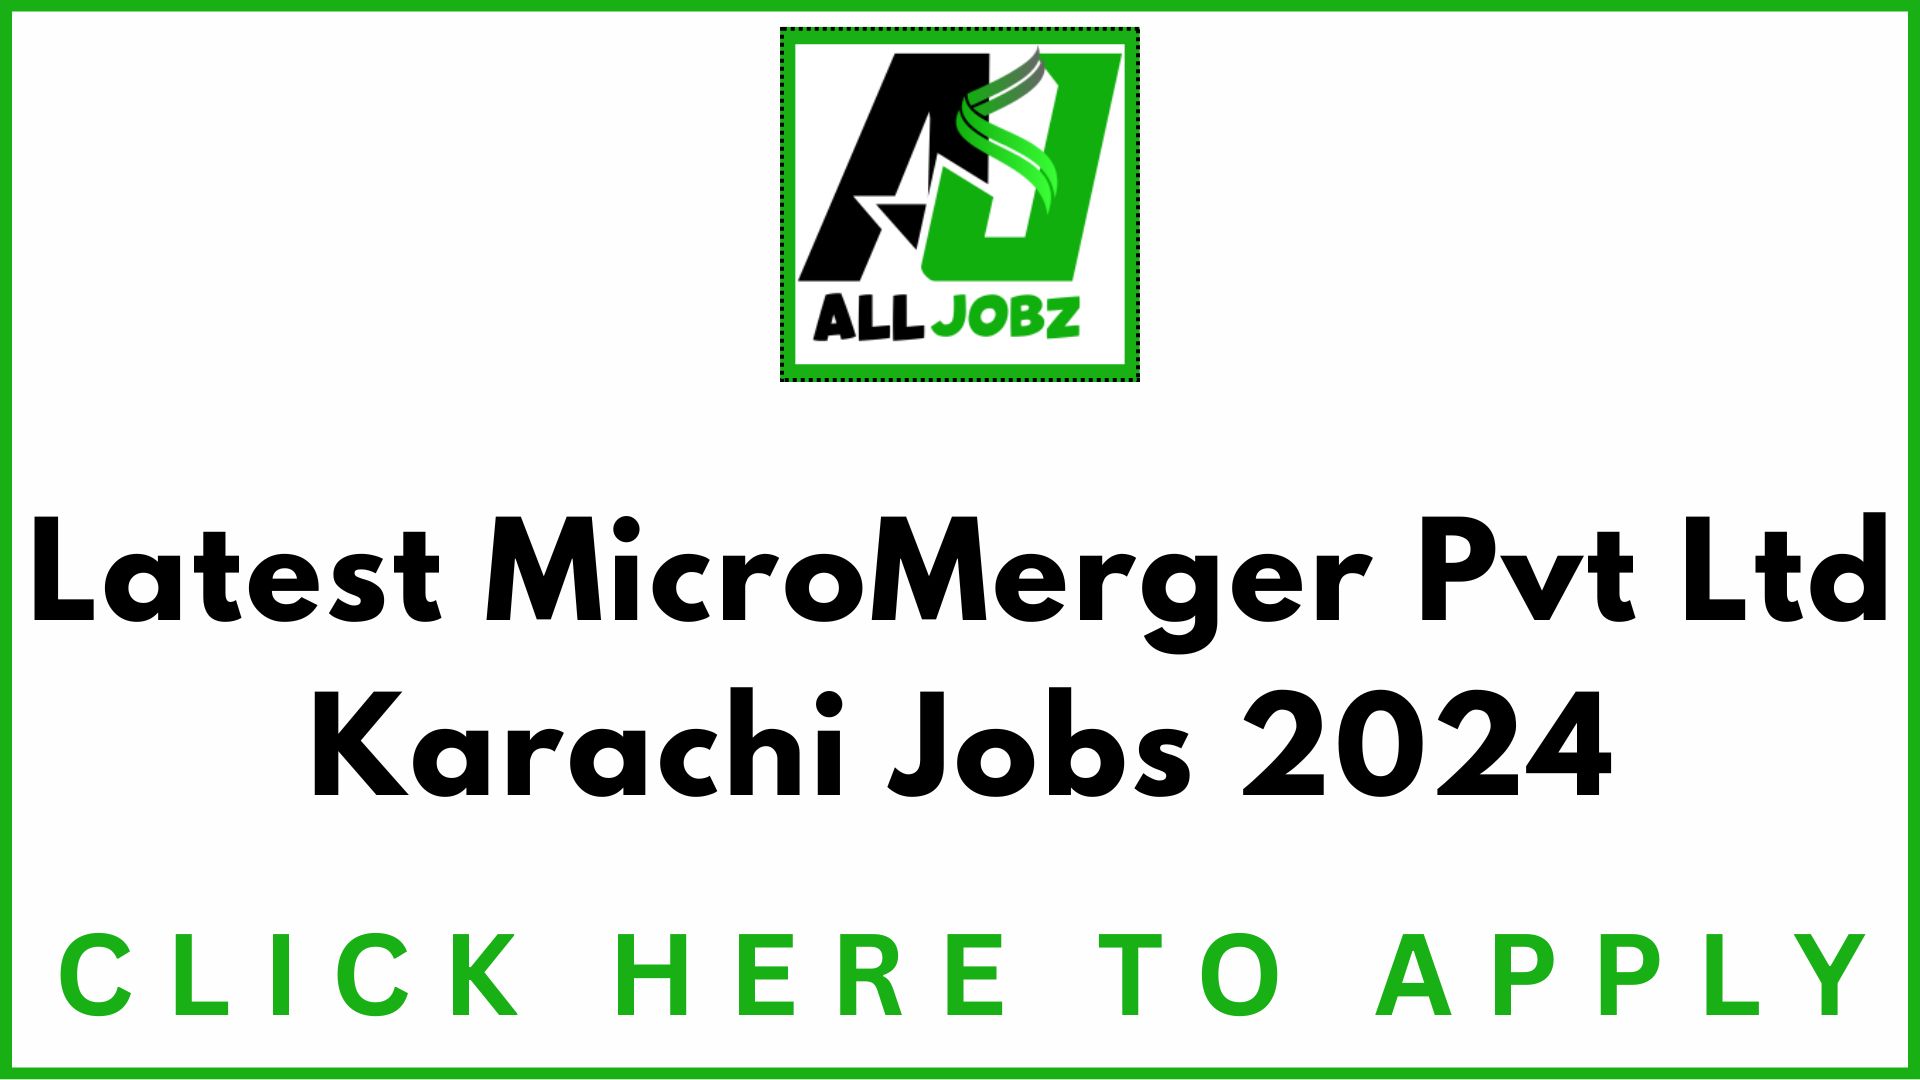 Career Opportunity At Micromerger Pvt Ltd Karachi, Latest Micromerger Pvt Ltd Karachi Jobs 2024 Karachi, Micromerger Pvt Ltd Karachi Jobs Salary, Micromerger Jobs 2024, Micromerger Pvt Ltd Karachi Jobs Contact Number, Field Monitor Jobs In Micromerger, Micromerger Jobs In Karachi, Micromerger Pvt Ltd Karachi Jobs 2024 Salary, Micromerger Pvt Ltd Karachi Jobs 2024 Last Date, Micromerger Jobs 2024, Micromerger Pvt Ltd Karachi Jobs 2024 Apply Online, Micromerger Pvt Ltd Karachi Jobs 2024 Apply, Field Monitor Jobs In Micromerger, Micromerger Jobs In Karachi,